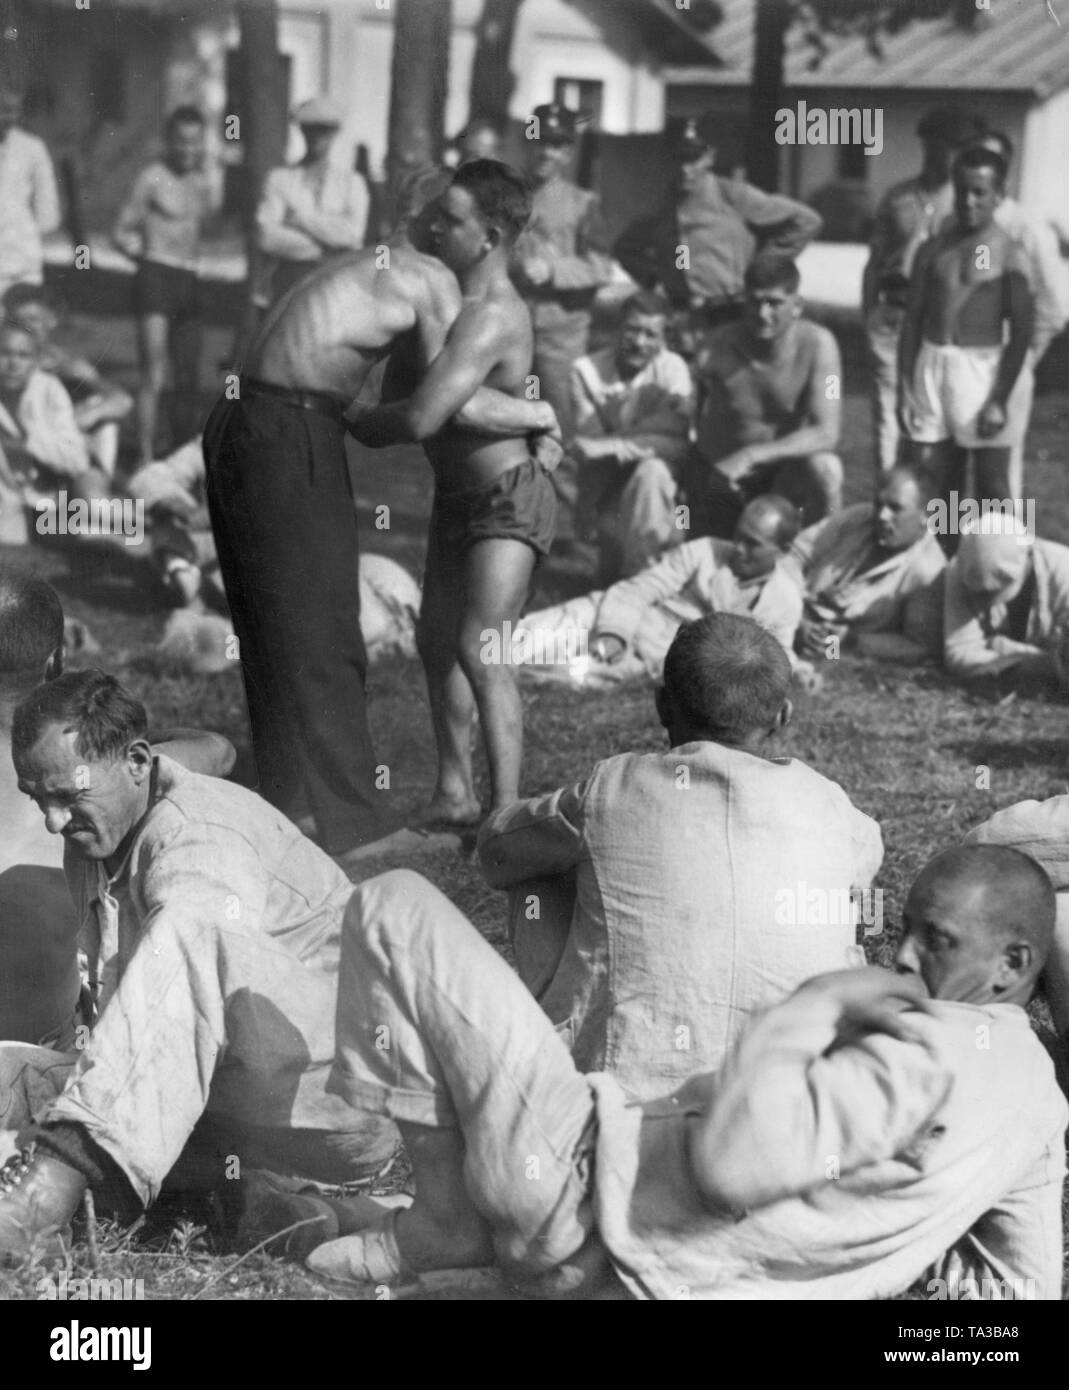 Prisoners of the Dachau concentration camp doing sport. Stock Photo